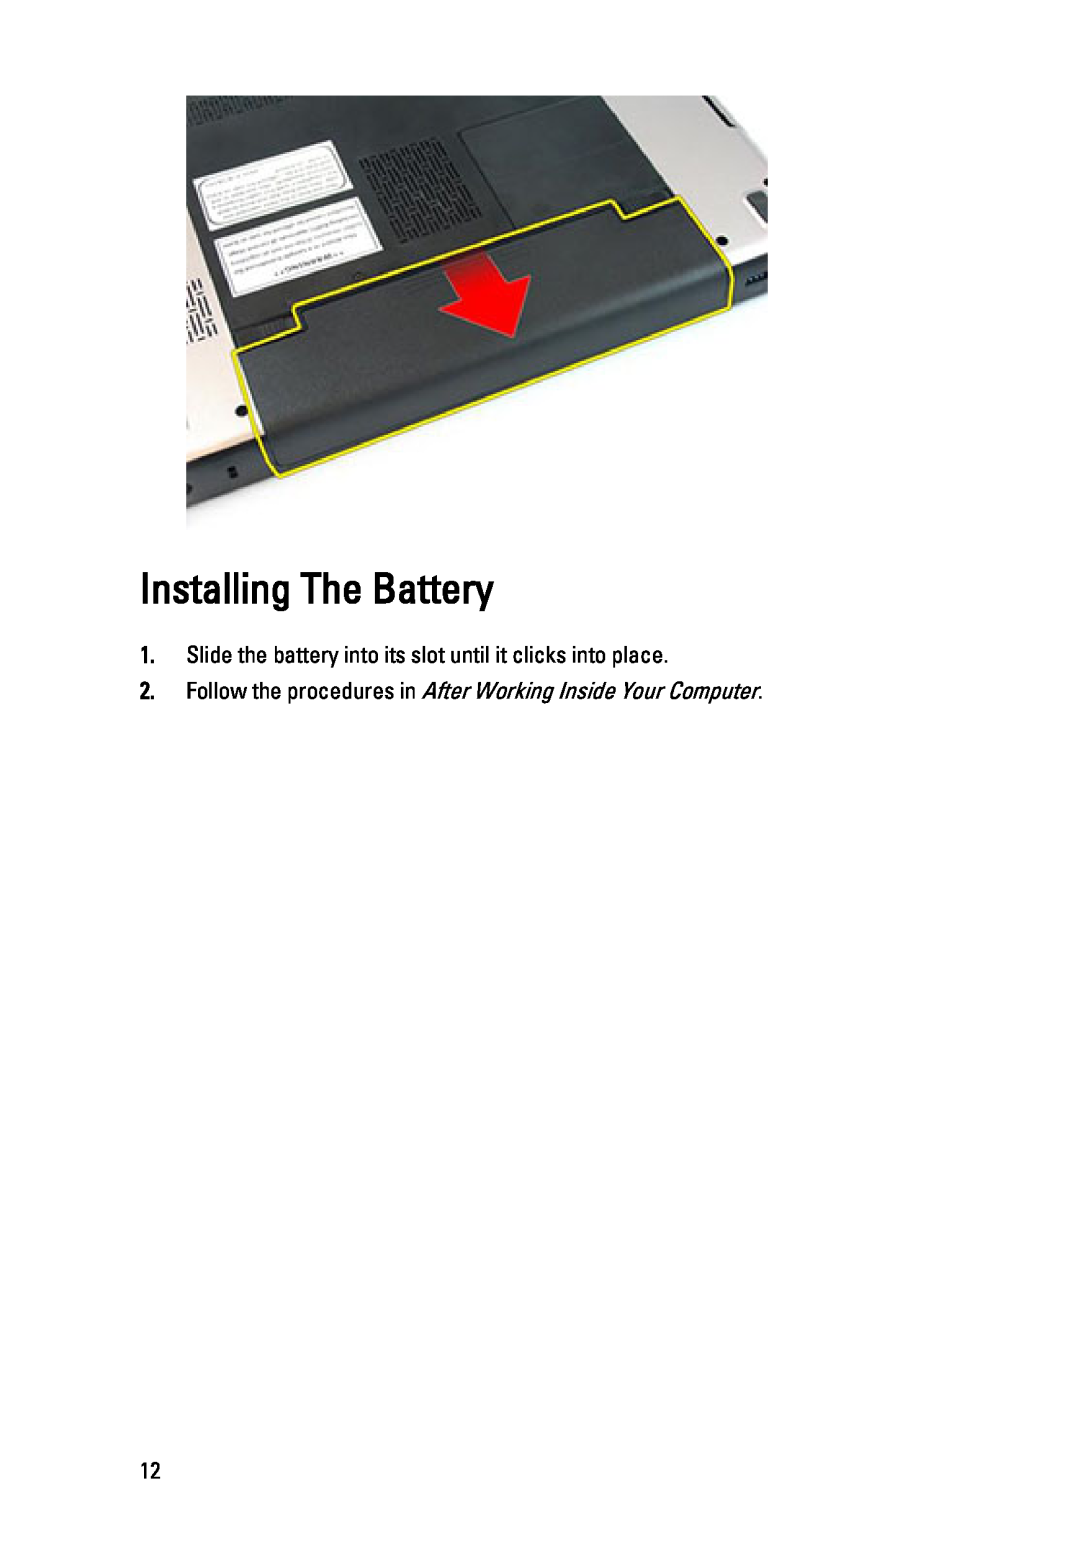 Dell 3450 owner manual Installing The Battery, Slide the battery into its slot until it clicks into place 